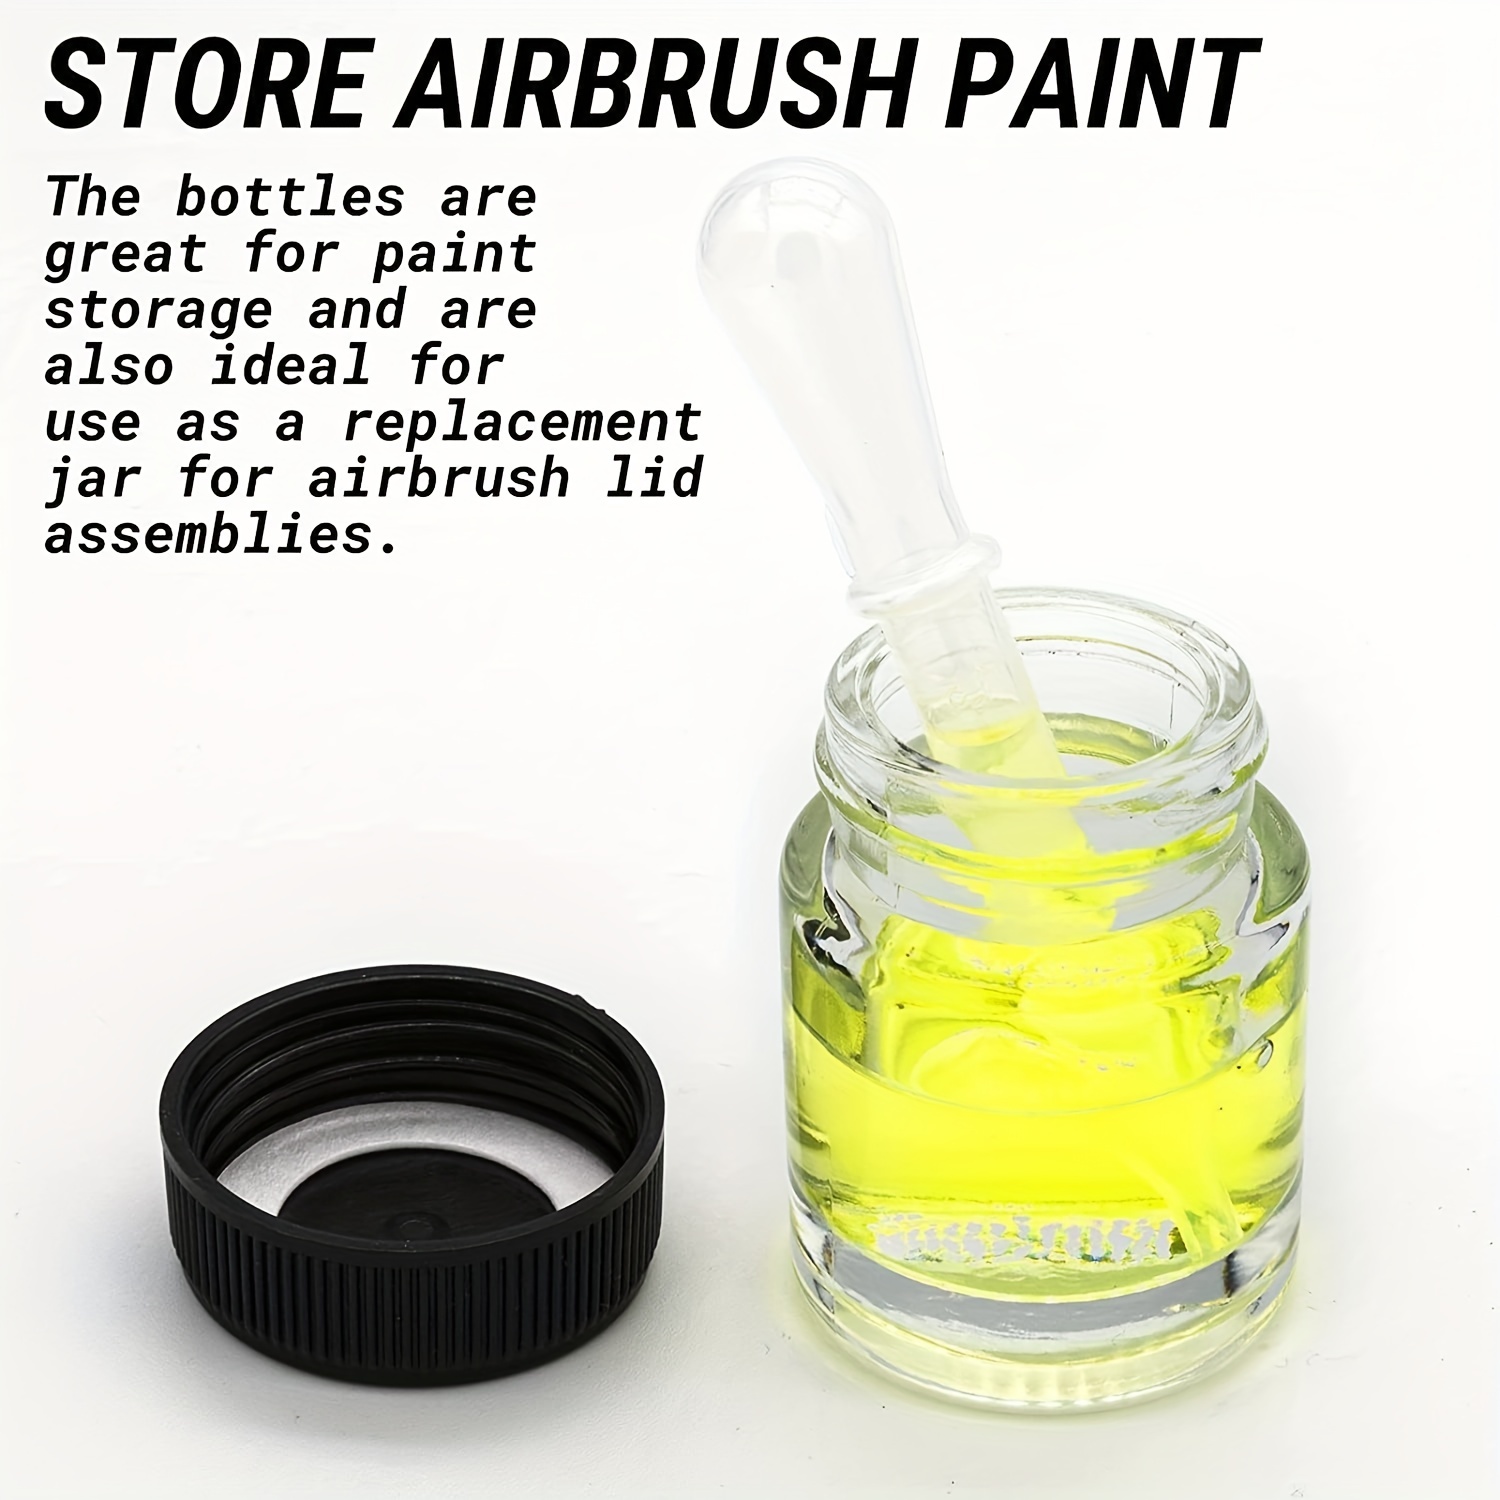 Master Airbrush (Pack of 10) TB-003 Empty 3/4 Ounce (22cc) Glass Jar Bottles with 60° Down Angle Adaptor Lid Assembly - Fits Single-Action Siphon